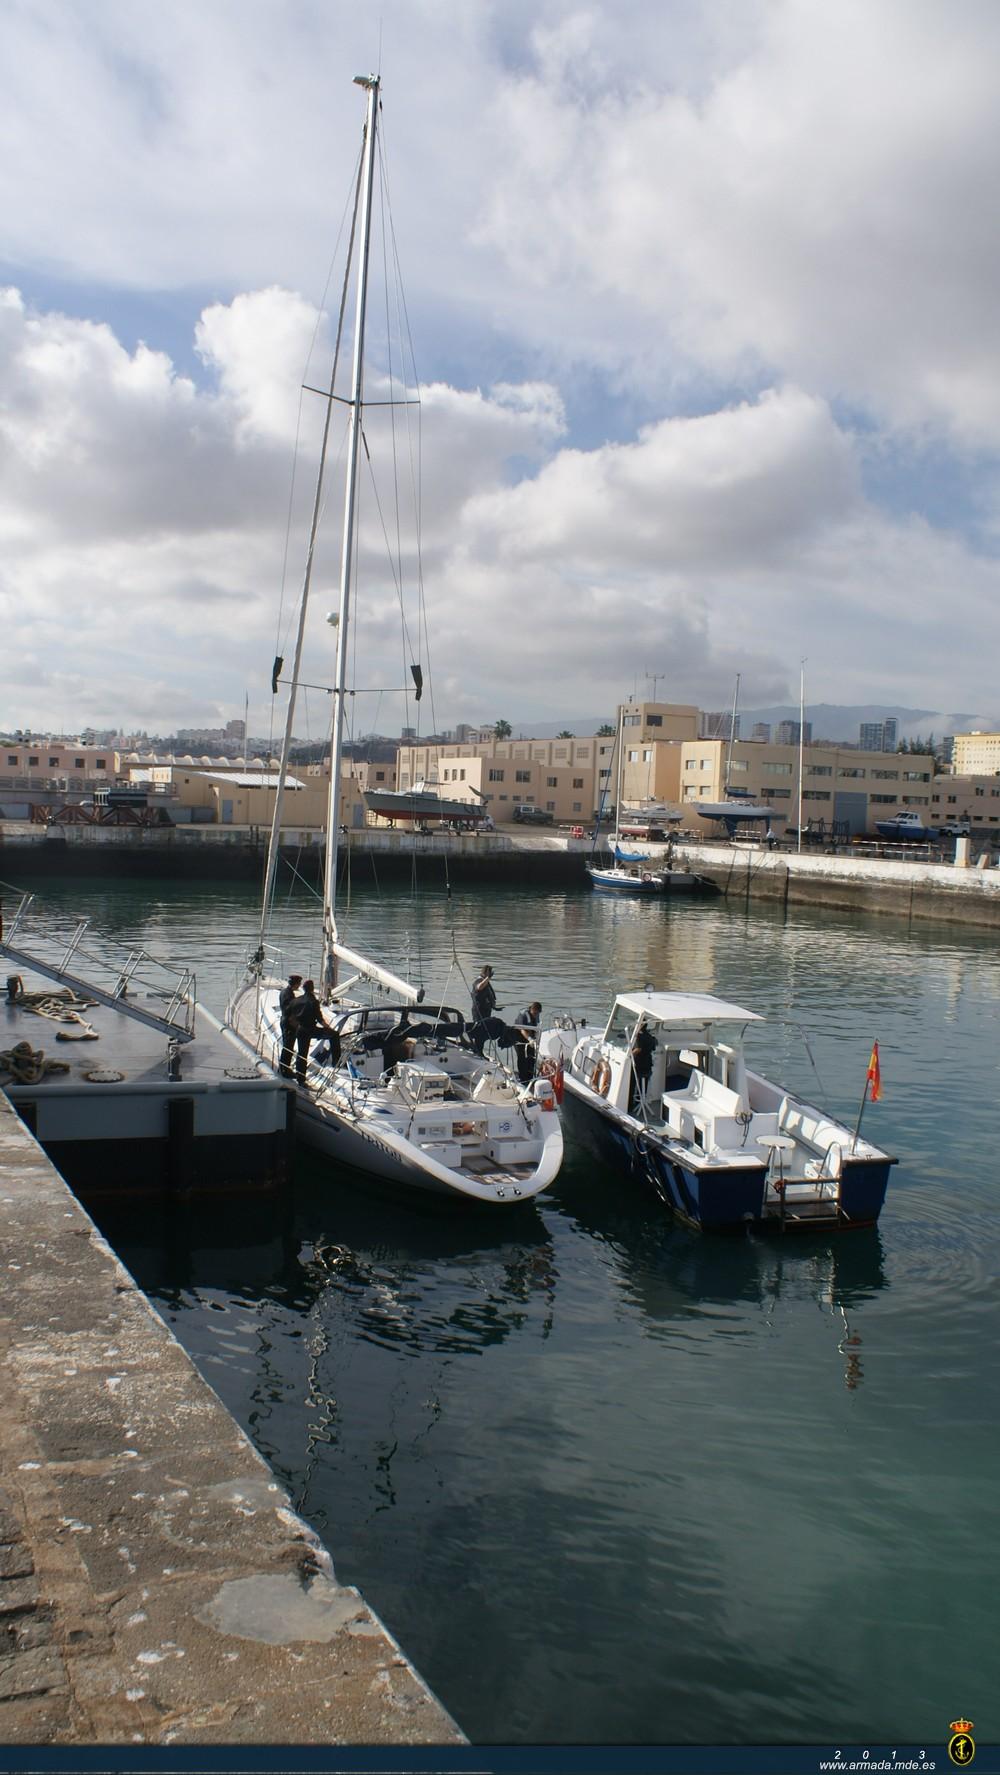 The ‘Tritón 2000’ was escorted and is docked at the Las Palmas Naval Station